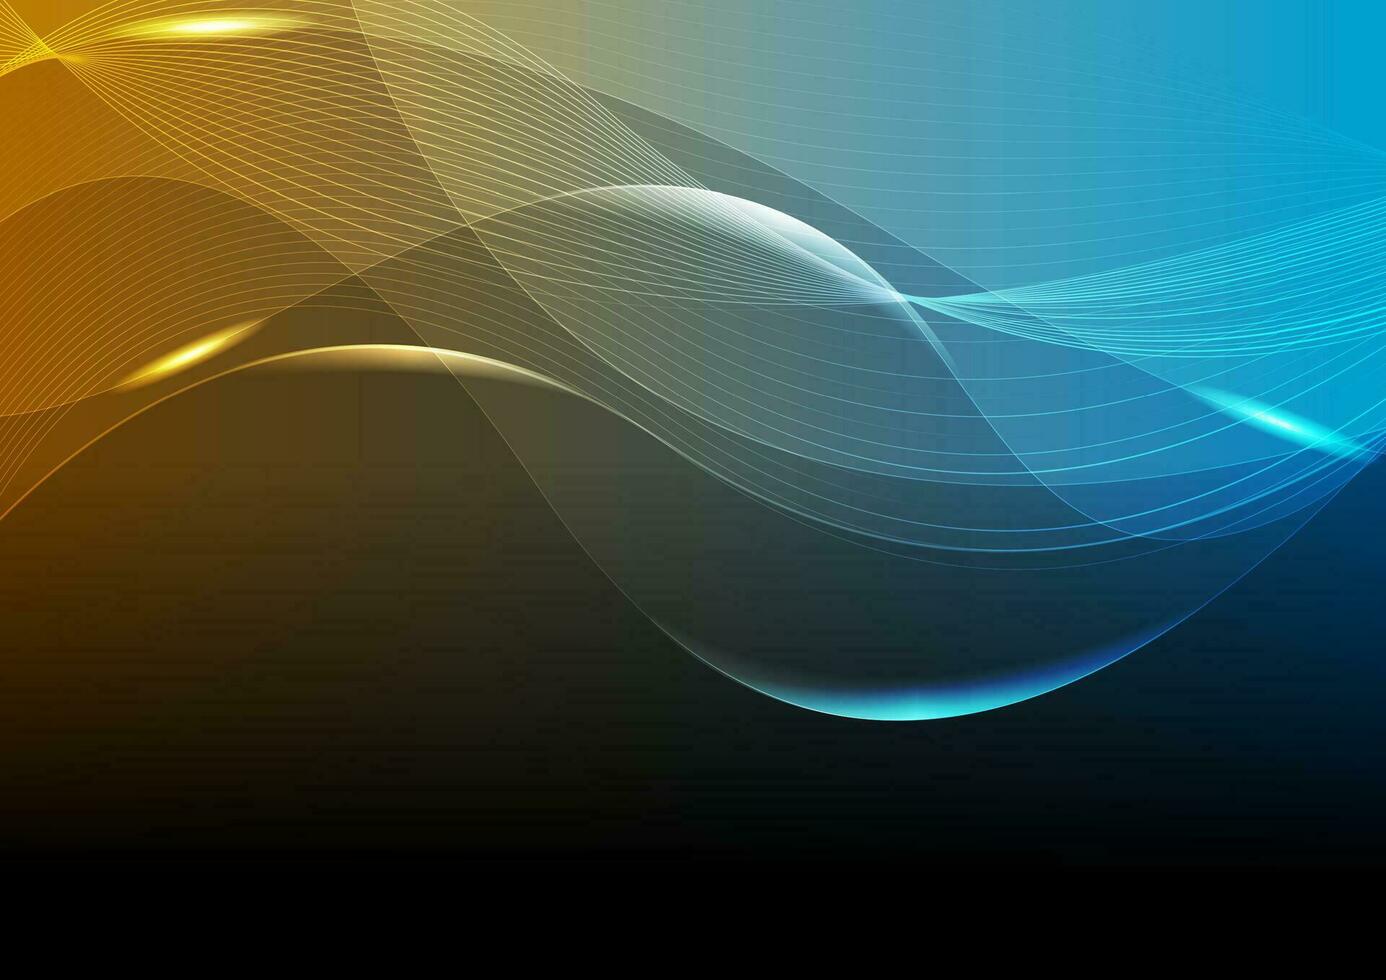 Bright glowing tech curved waves background vector